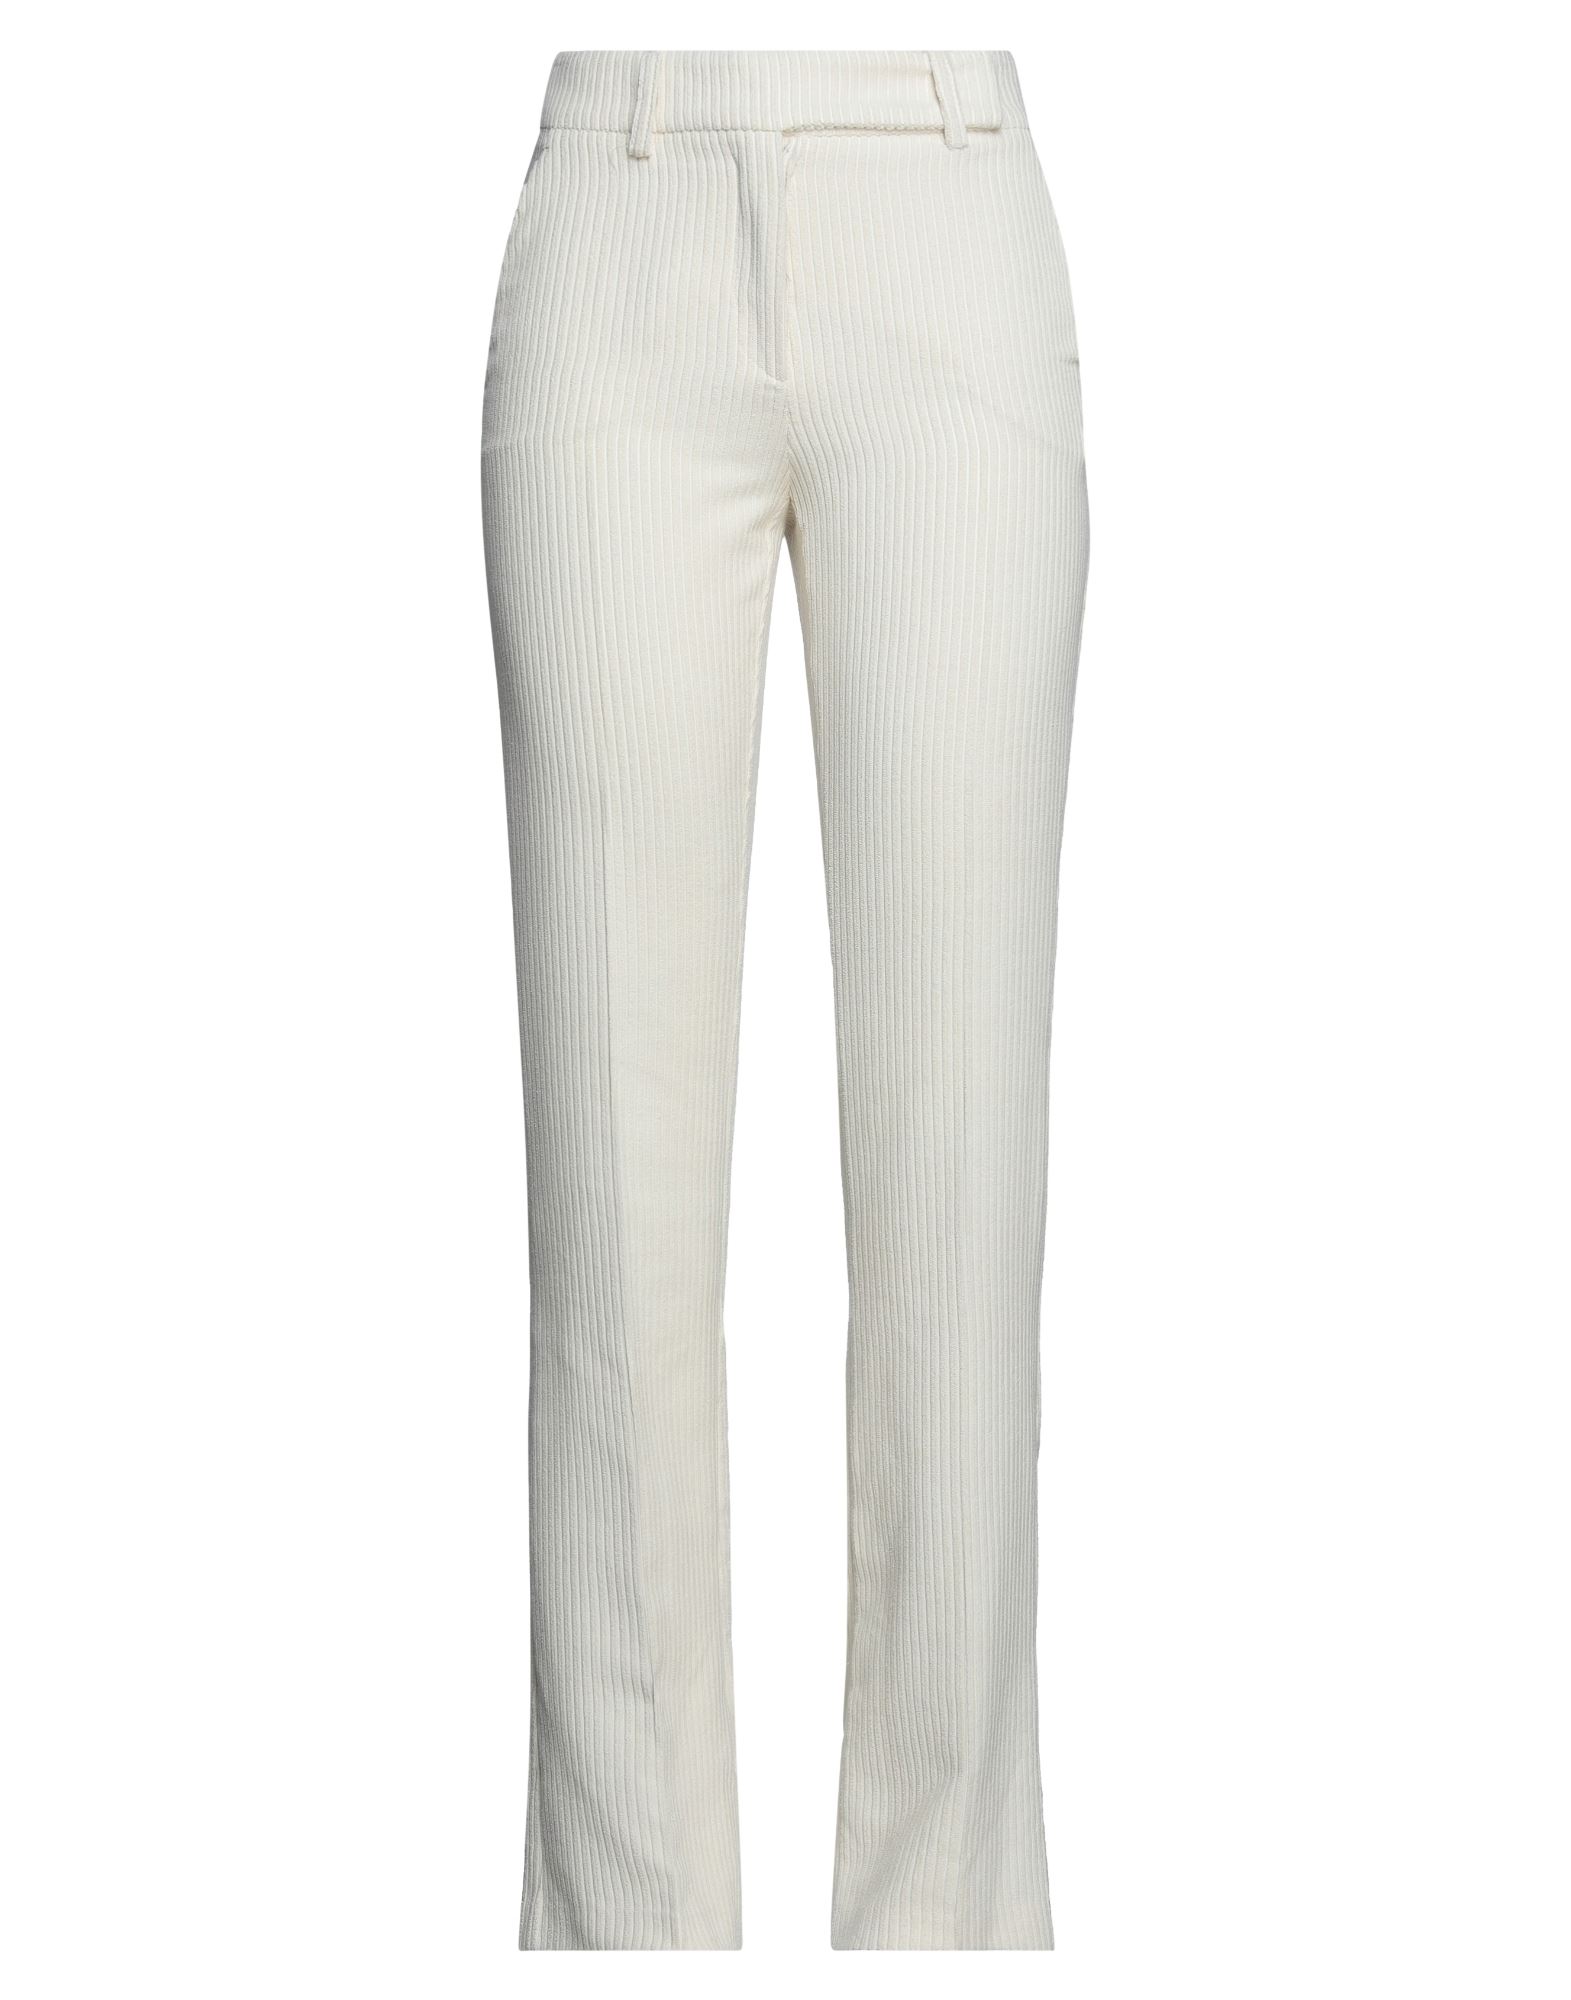 Olla Parèg Pants In White